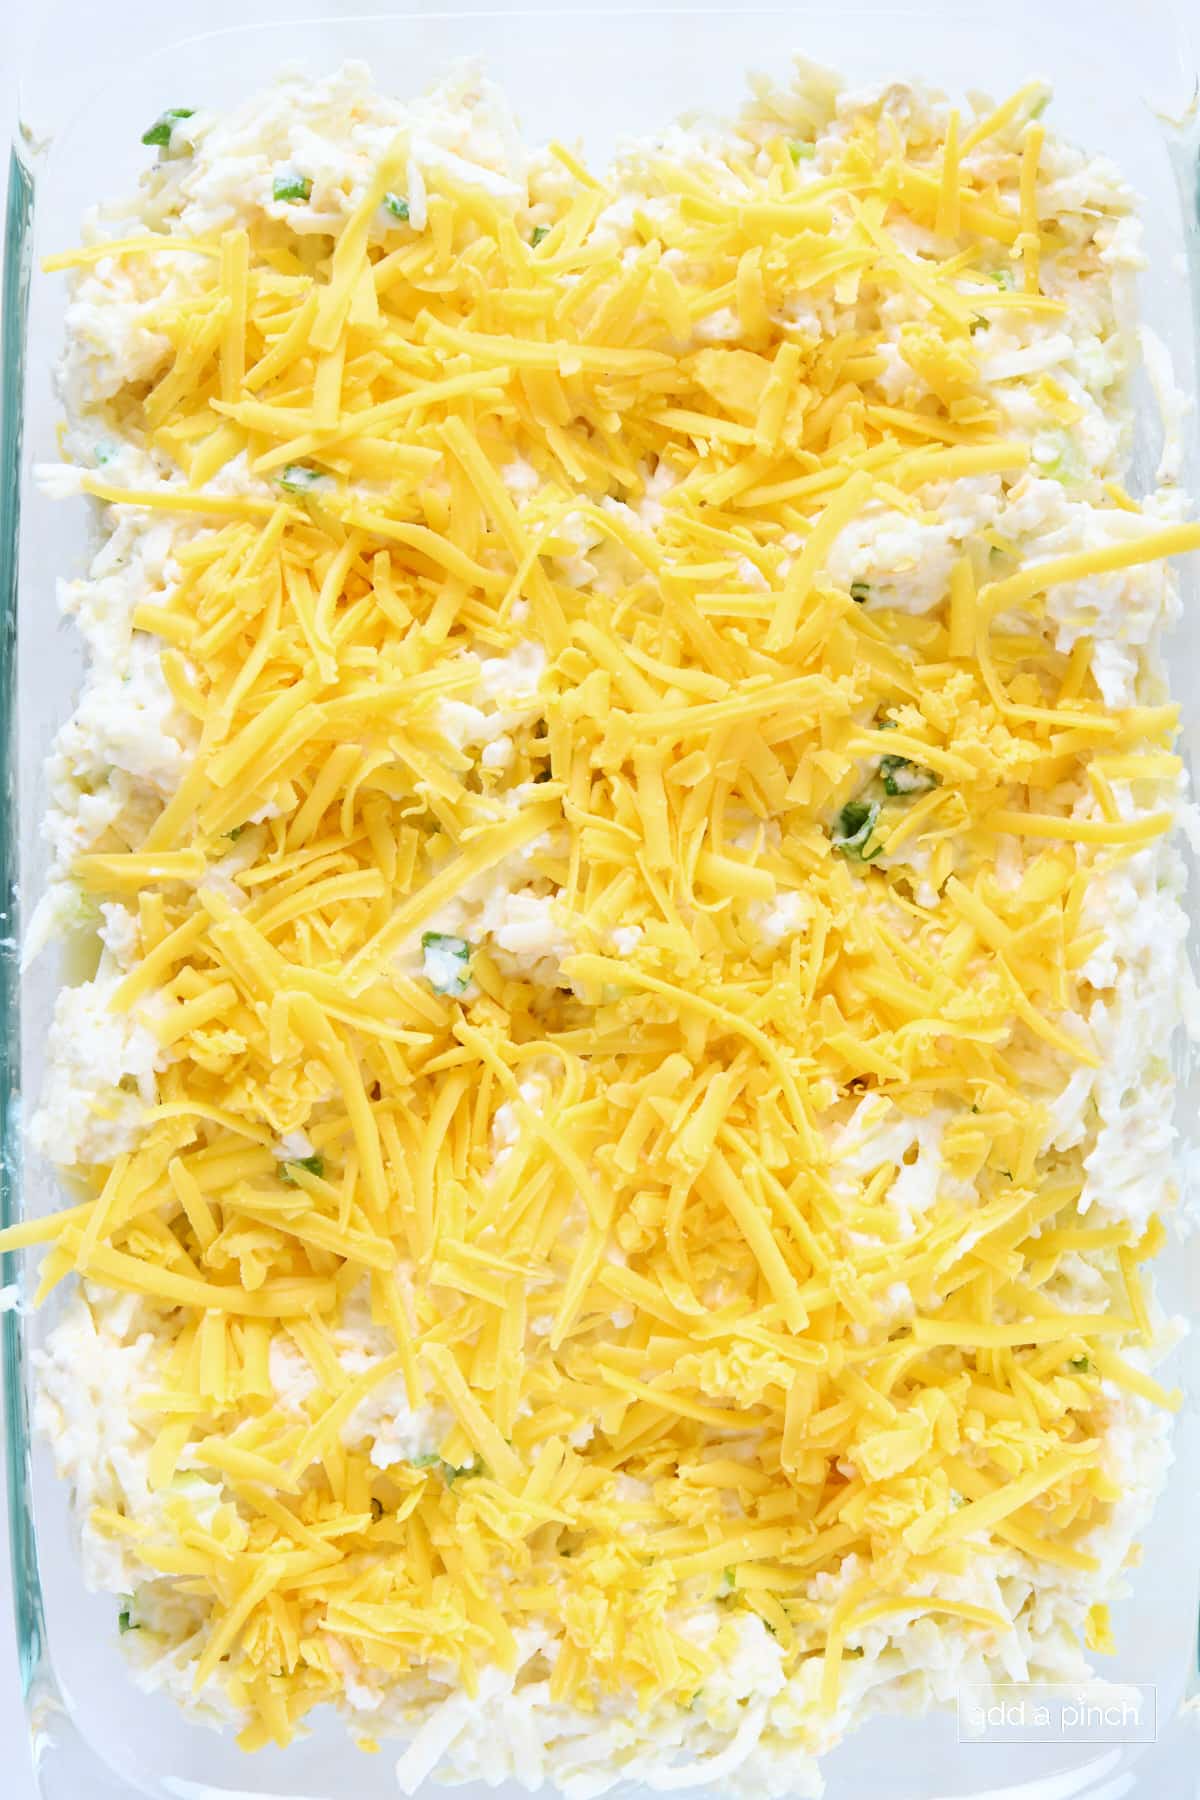 Shredded cheese topping shredded potato casserole in a glass baking dish ready to be baked.